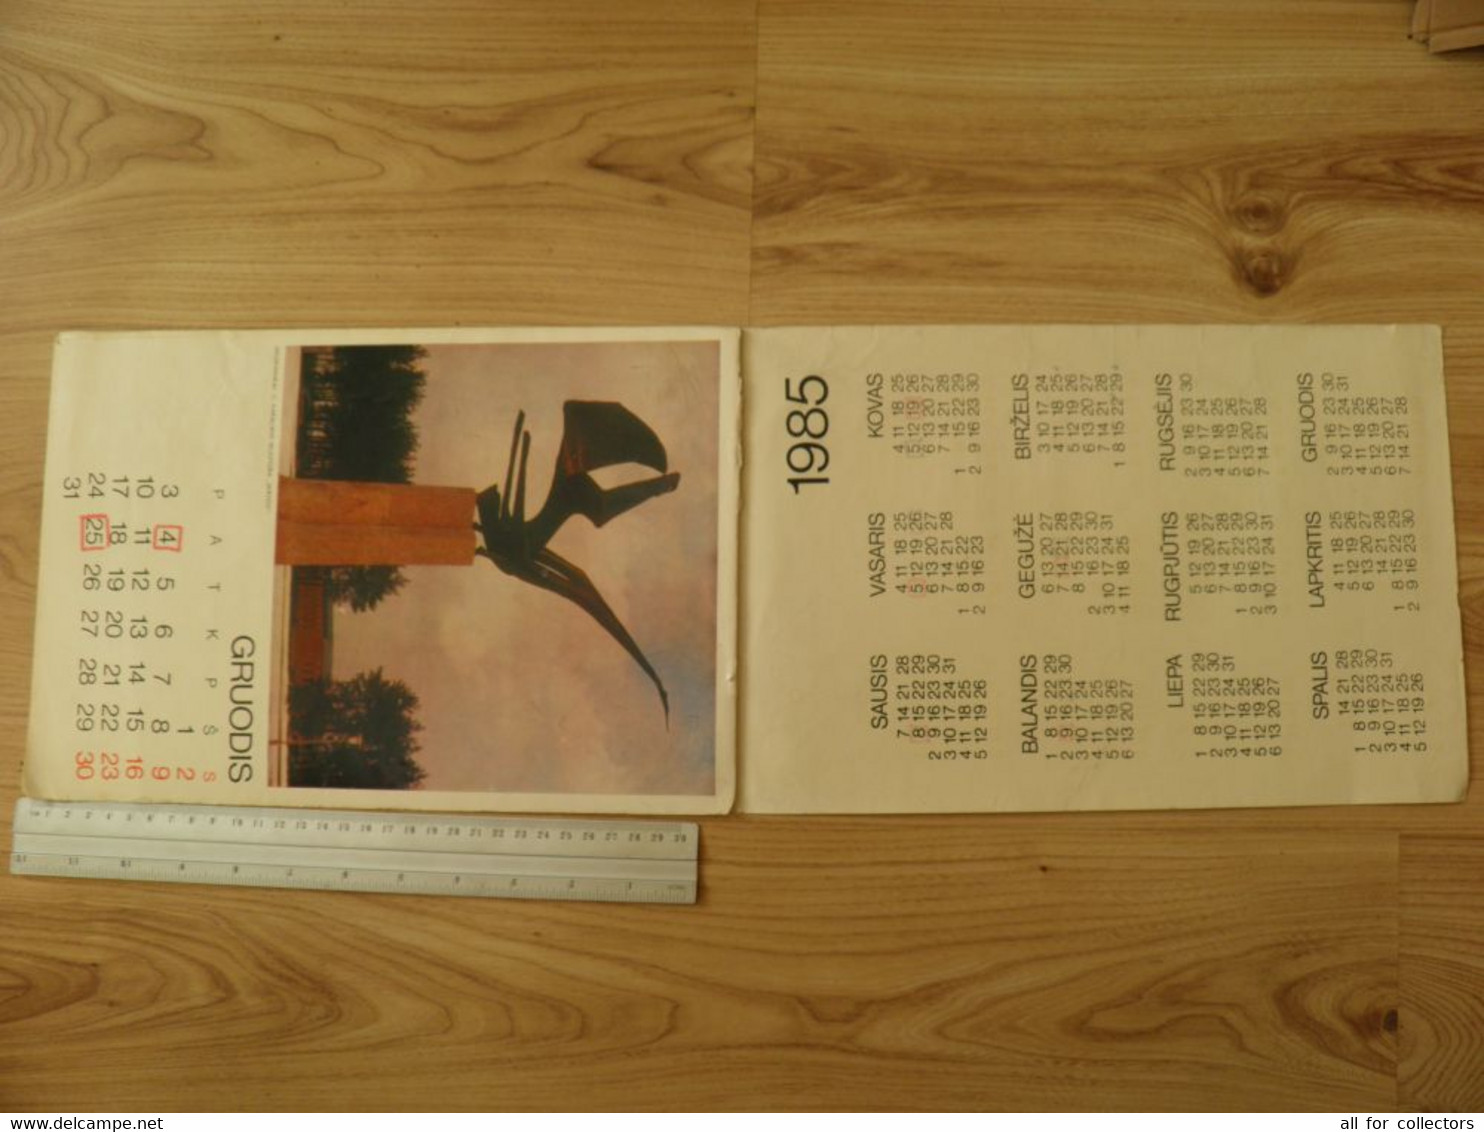 large size calendar 1984 ussr Lithuania soviet occupation period Lithuanian resorts 21,5x32,5cm